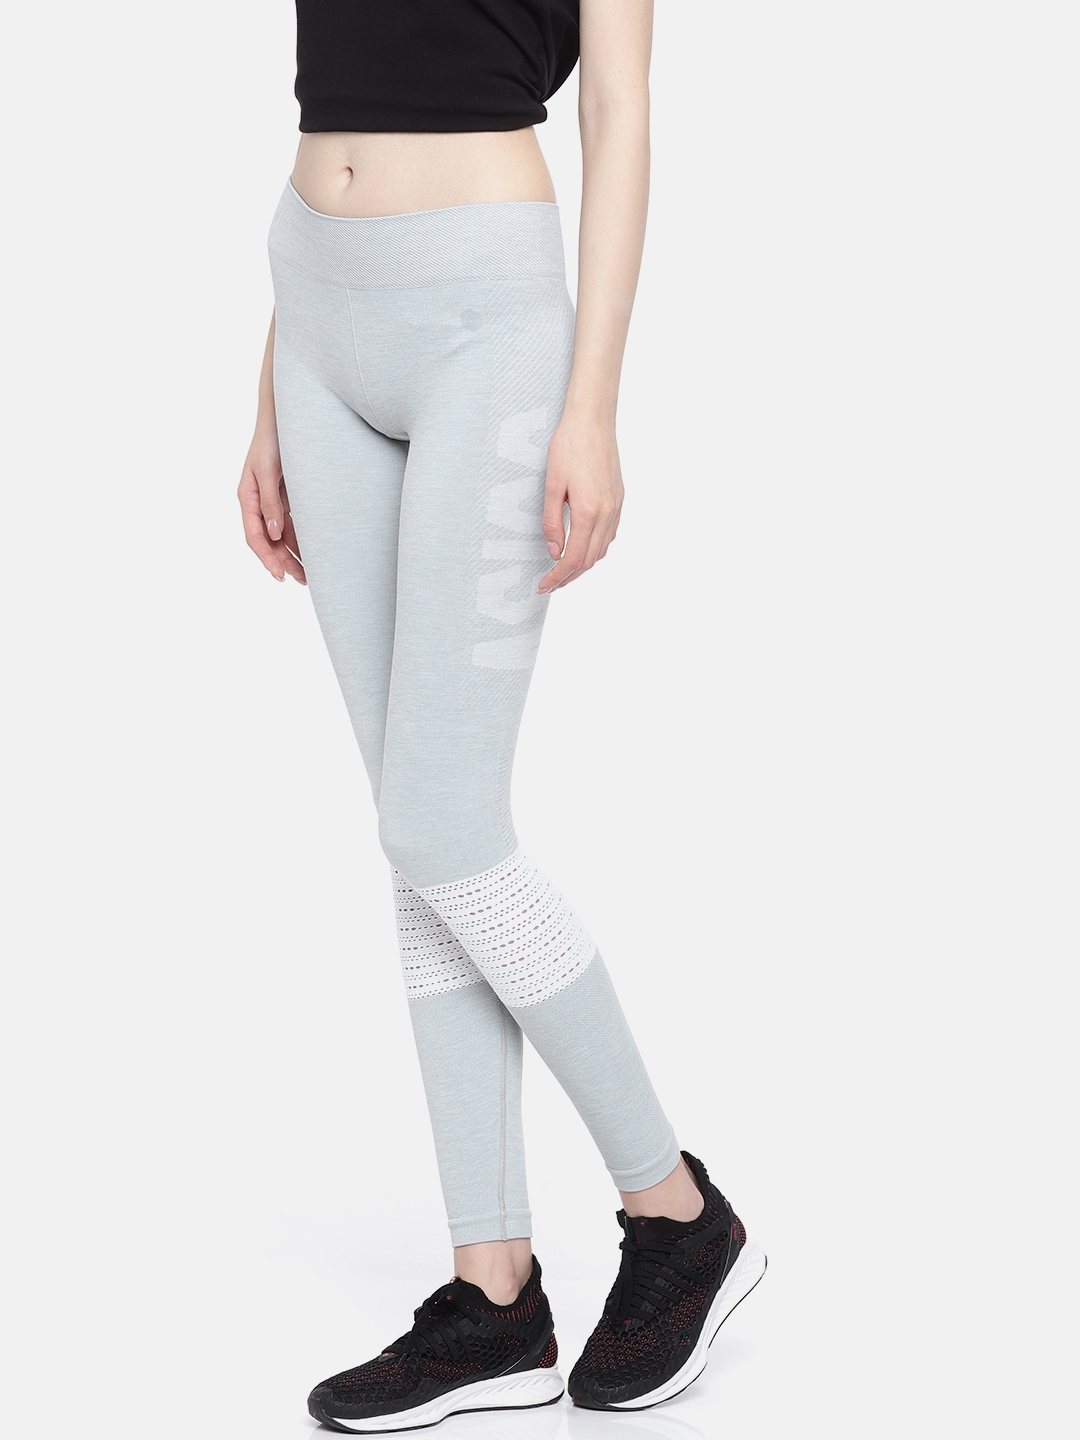 Buy ASICS Women Grey Solid Seamless Tights - Tights for Women 5648495 | Myntra